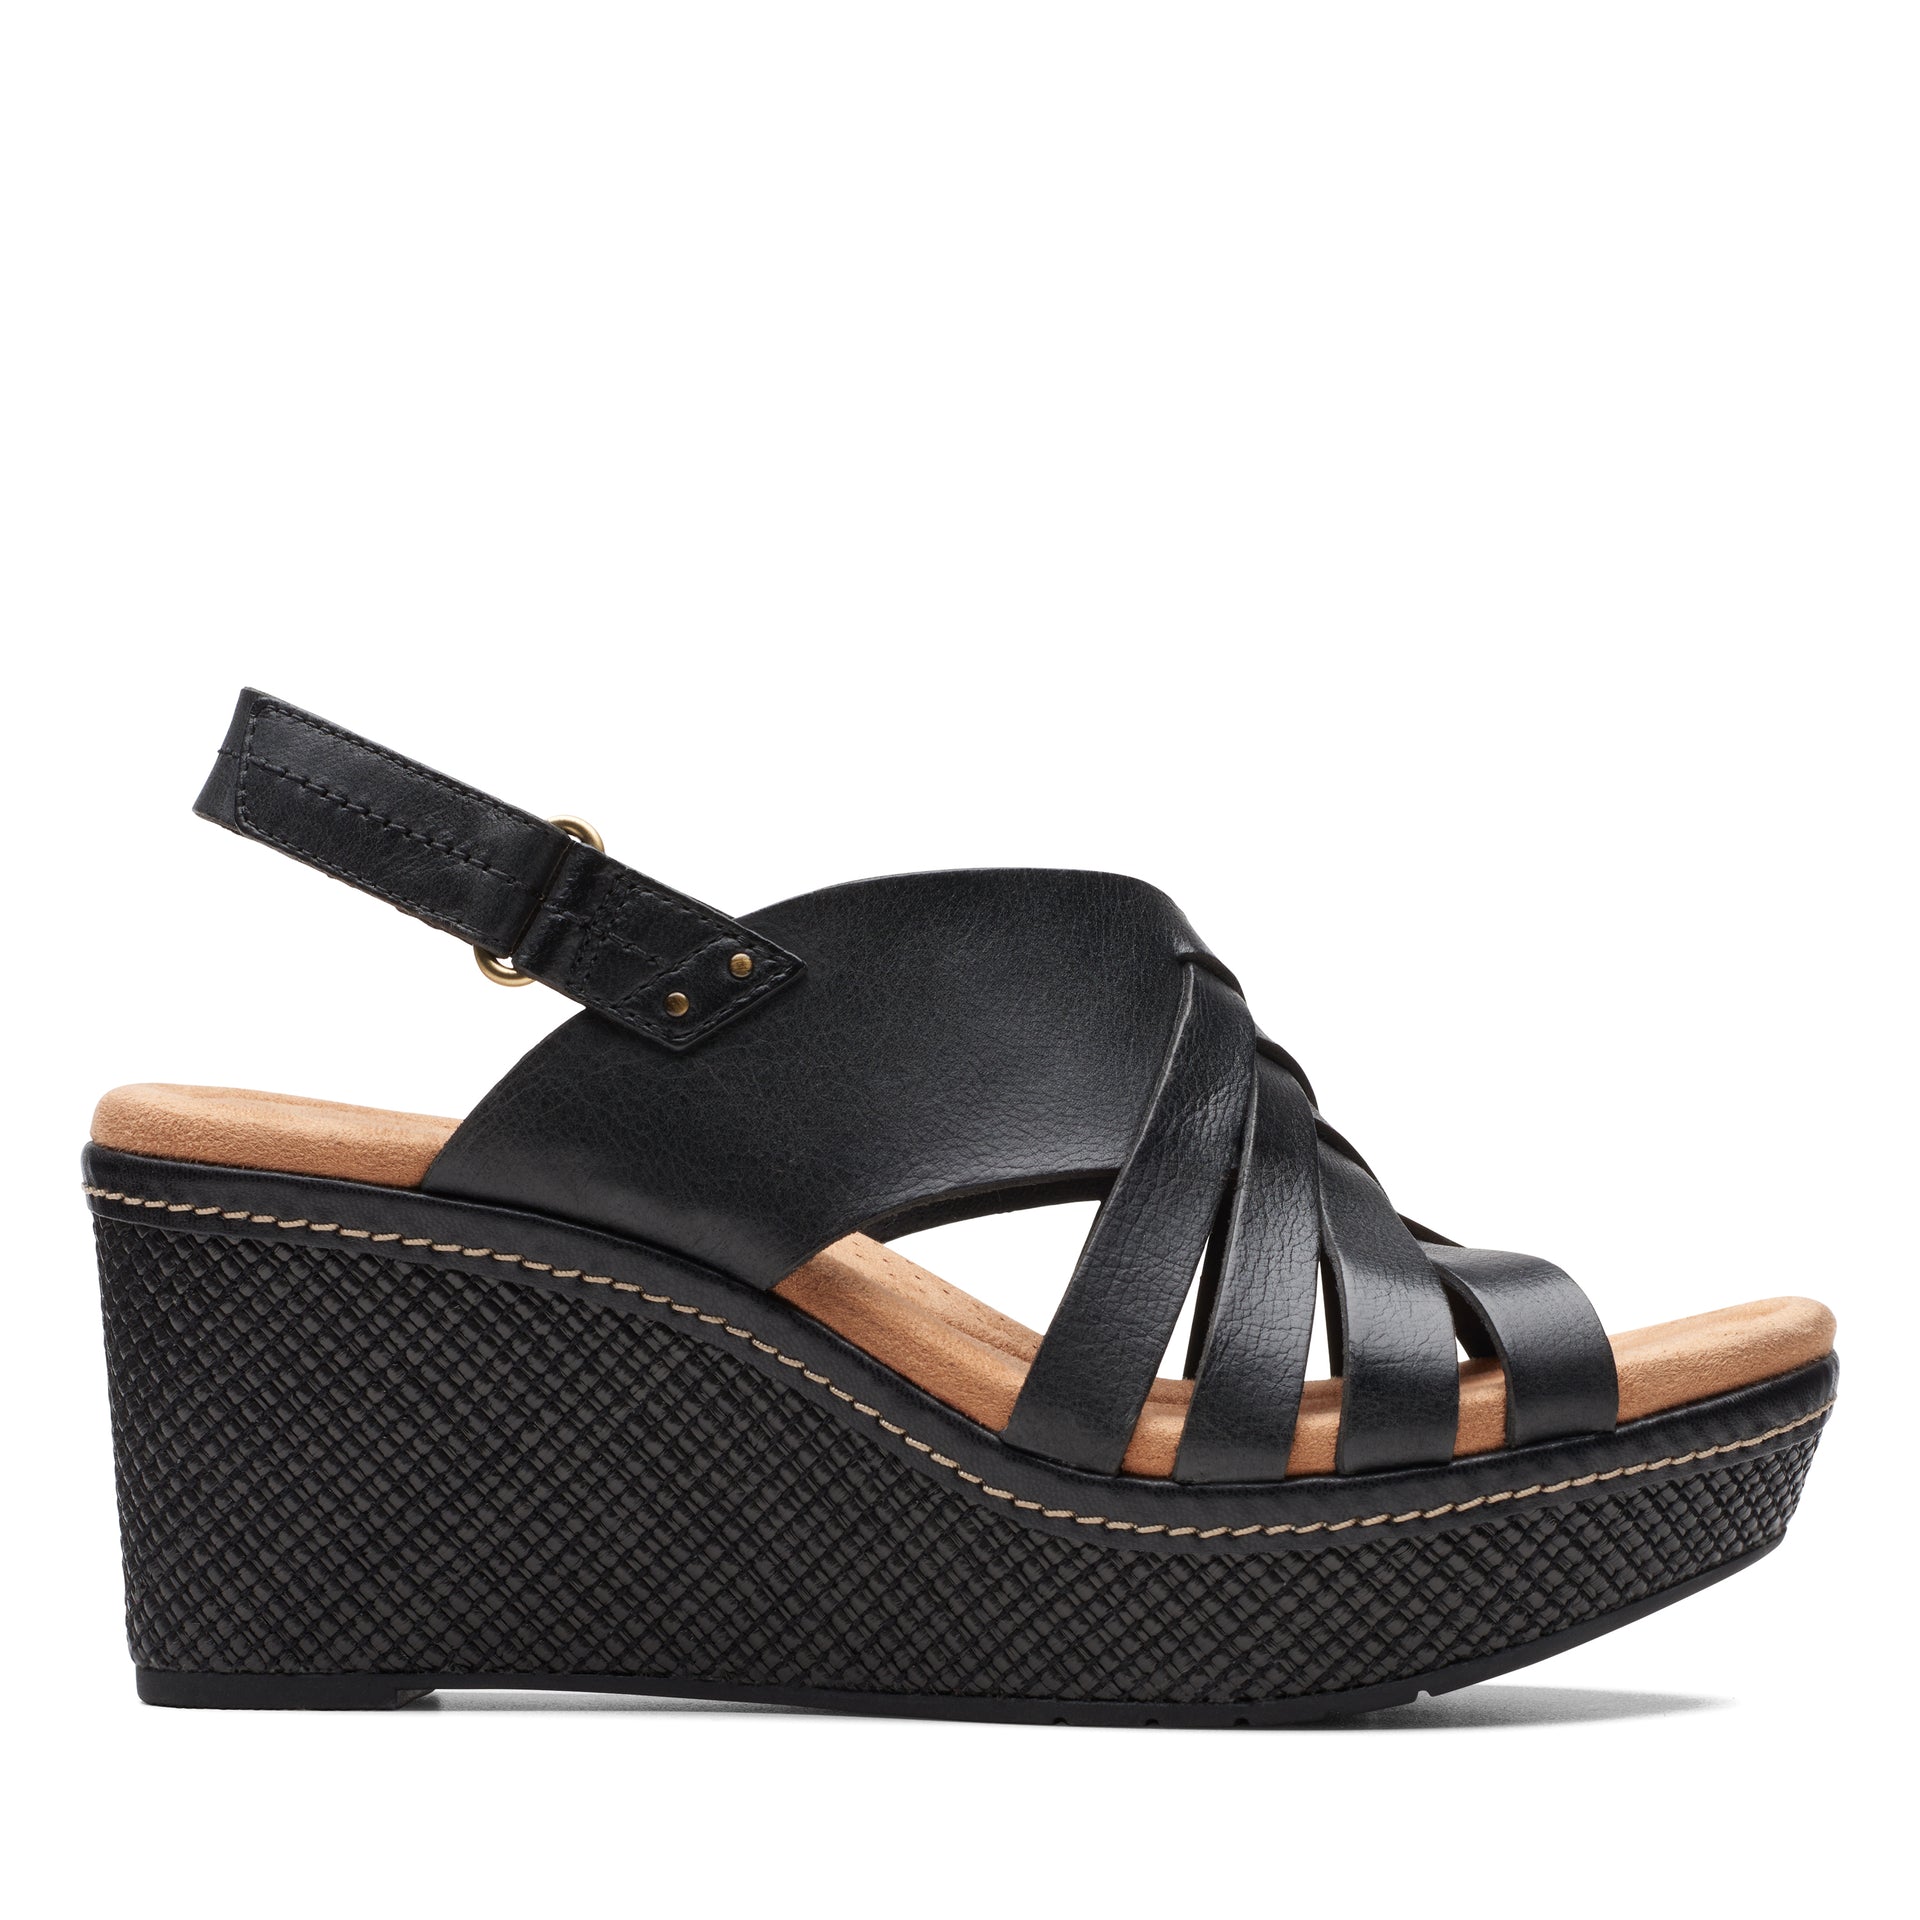 Buy Wedge Sandals For Women Online | Clarks Shoes Singapore